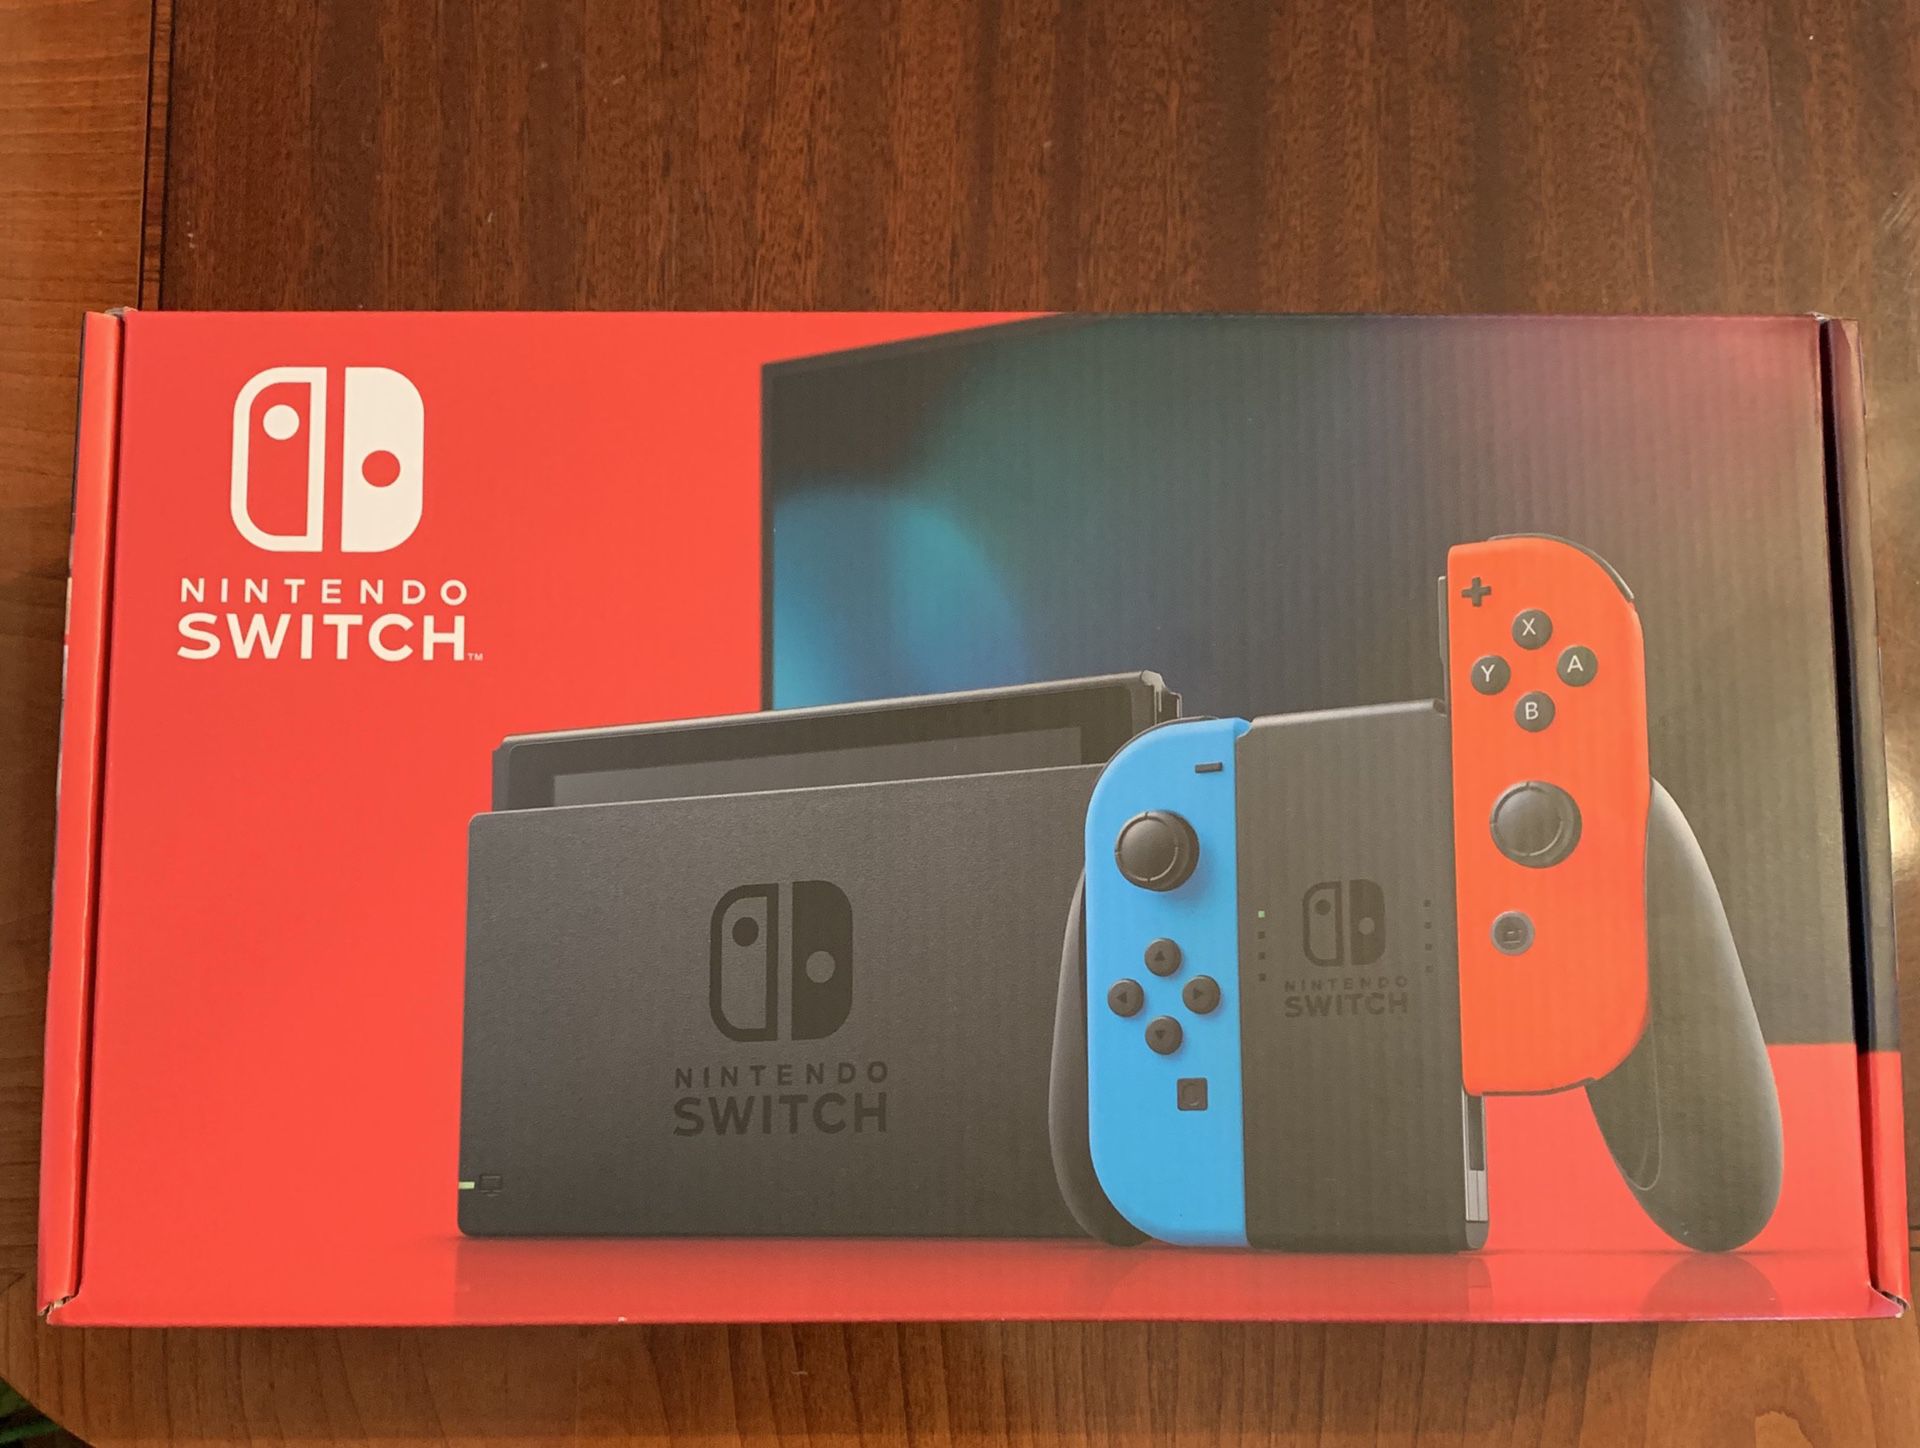 Nintendo Switch Neon Red and Neon Blue Joy-Cons